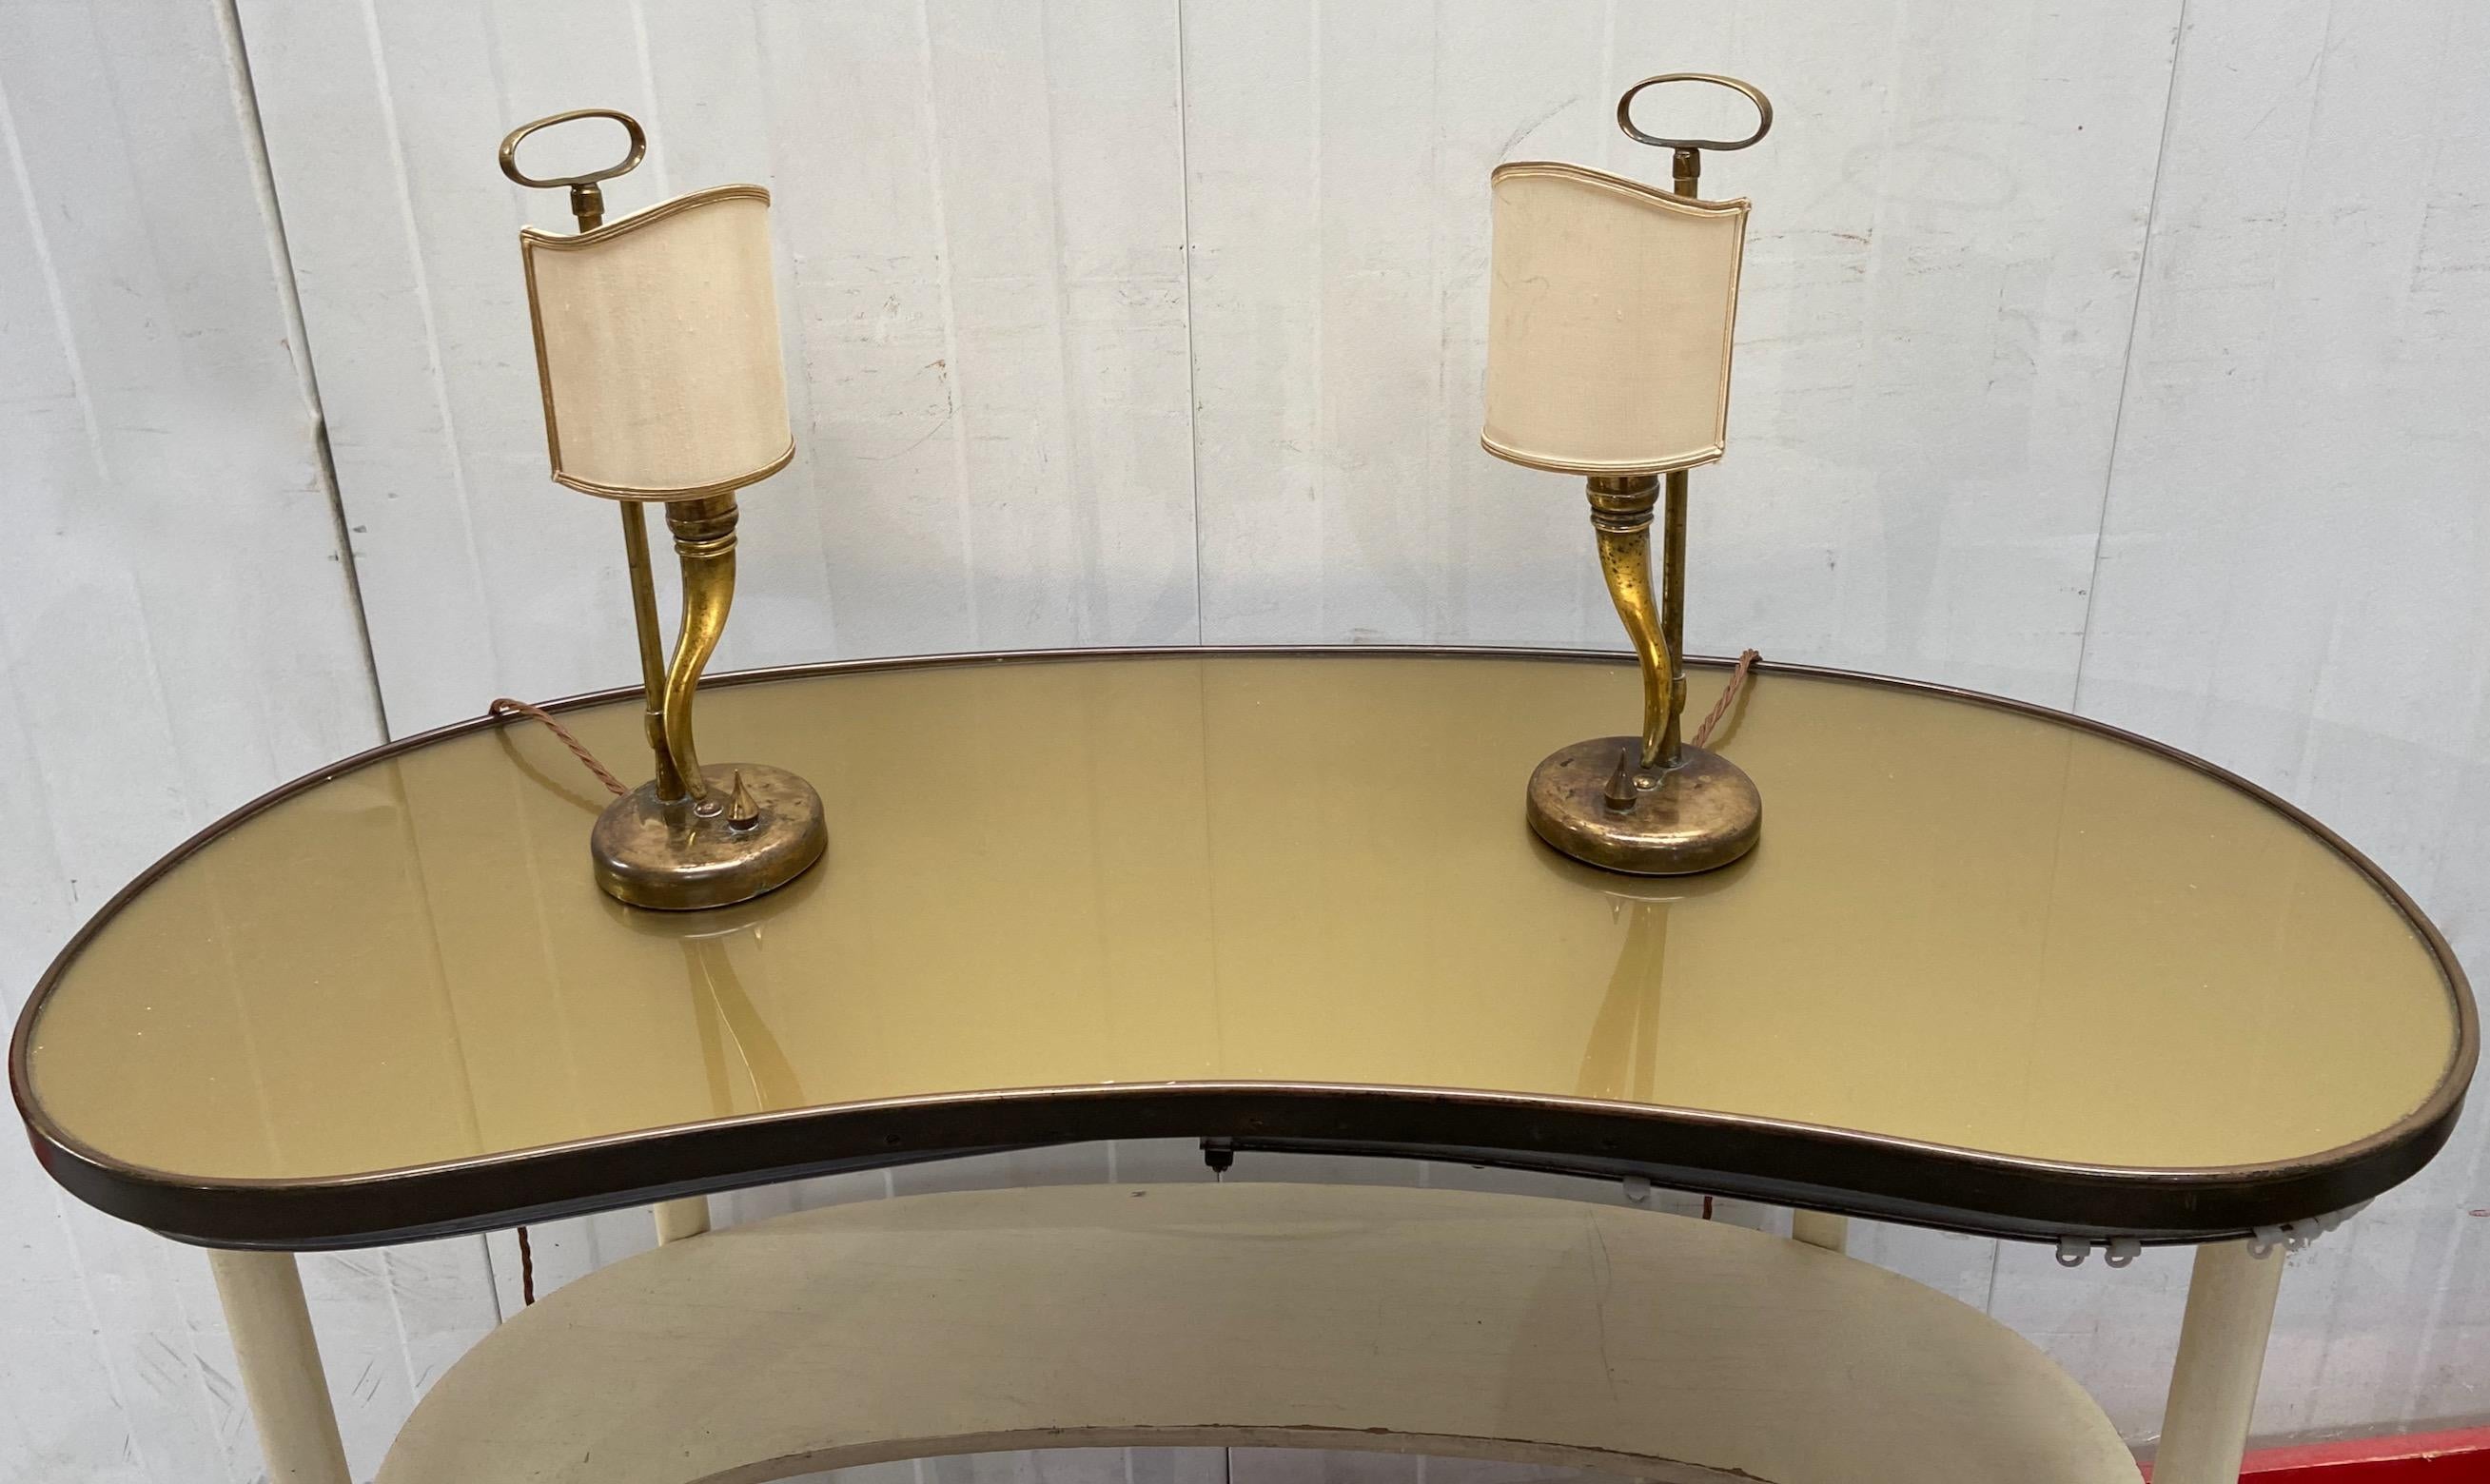 A very elegant pair of 1940's to 1950's brass table lamps, attributed to, and most probably by, Gio Ponti and Emilio Lancia. 
They could be polished if needed but we prefer them as found.
Please note that our handling time is usually shorter than